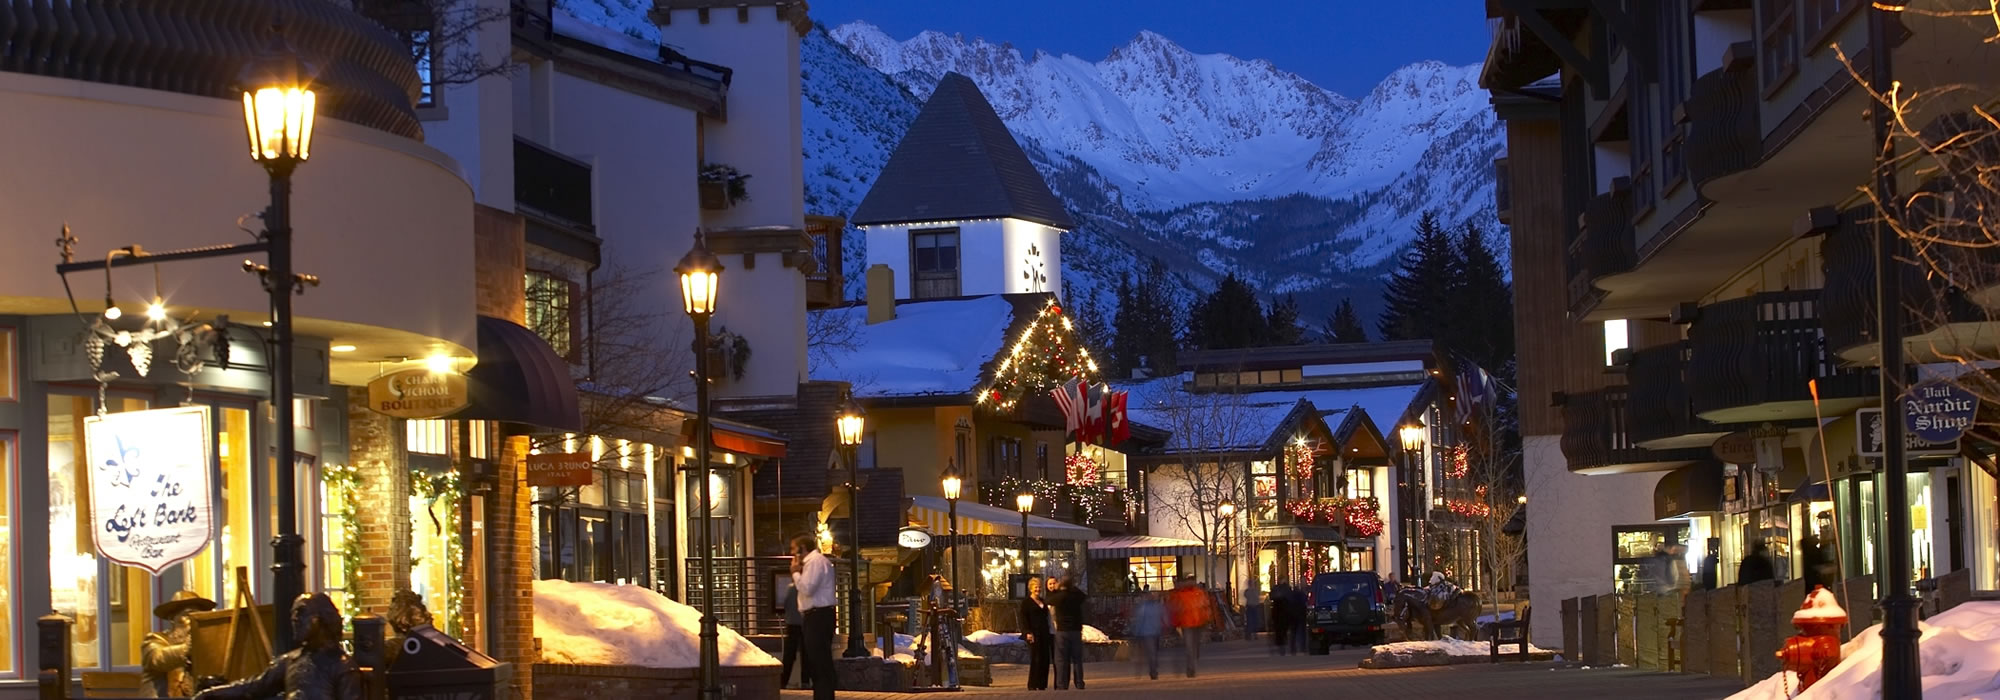 Vail, the renown resorts that gave name to the company that now manages the Epic Pass. 